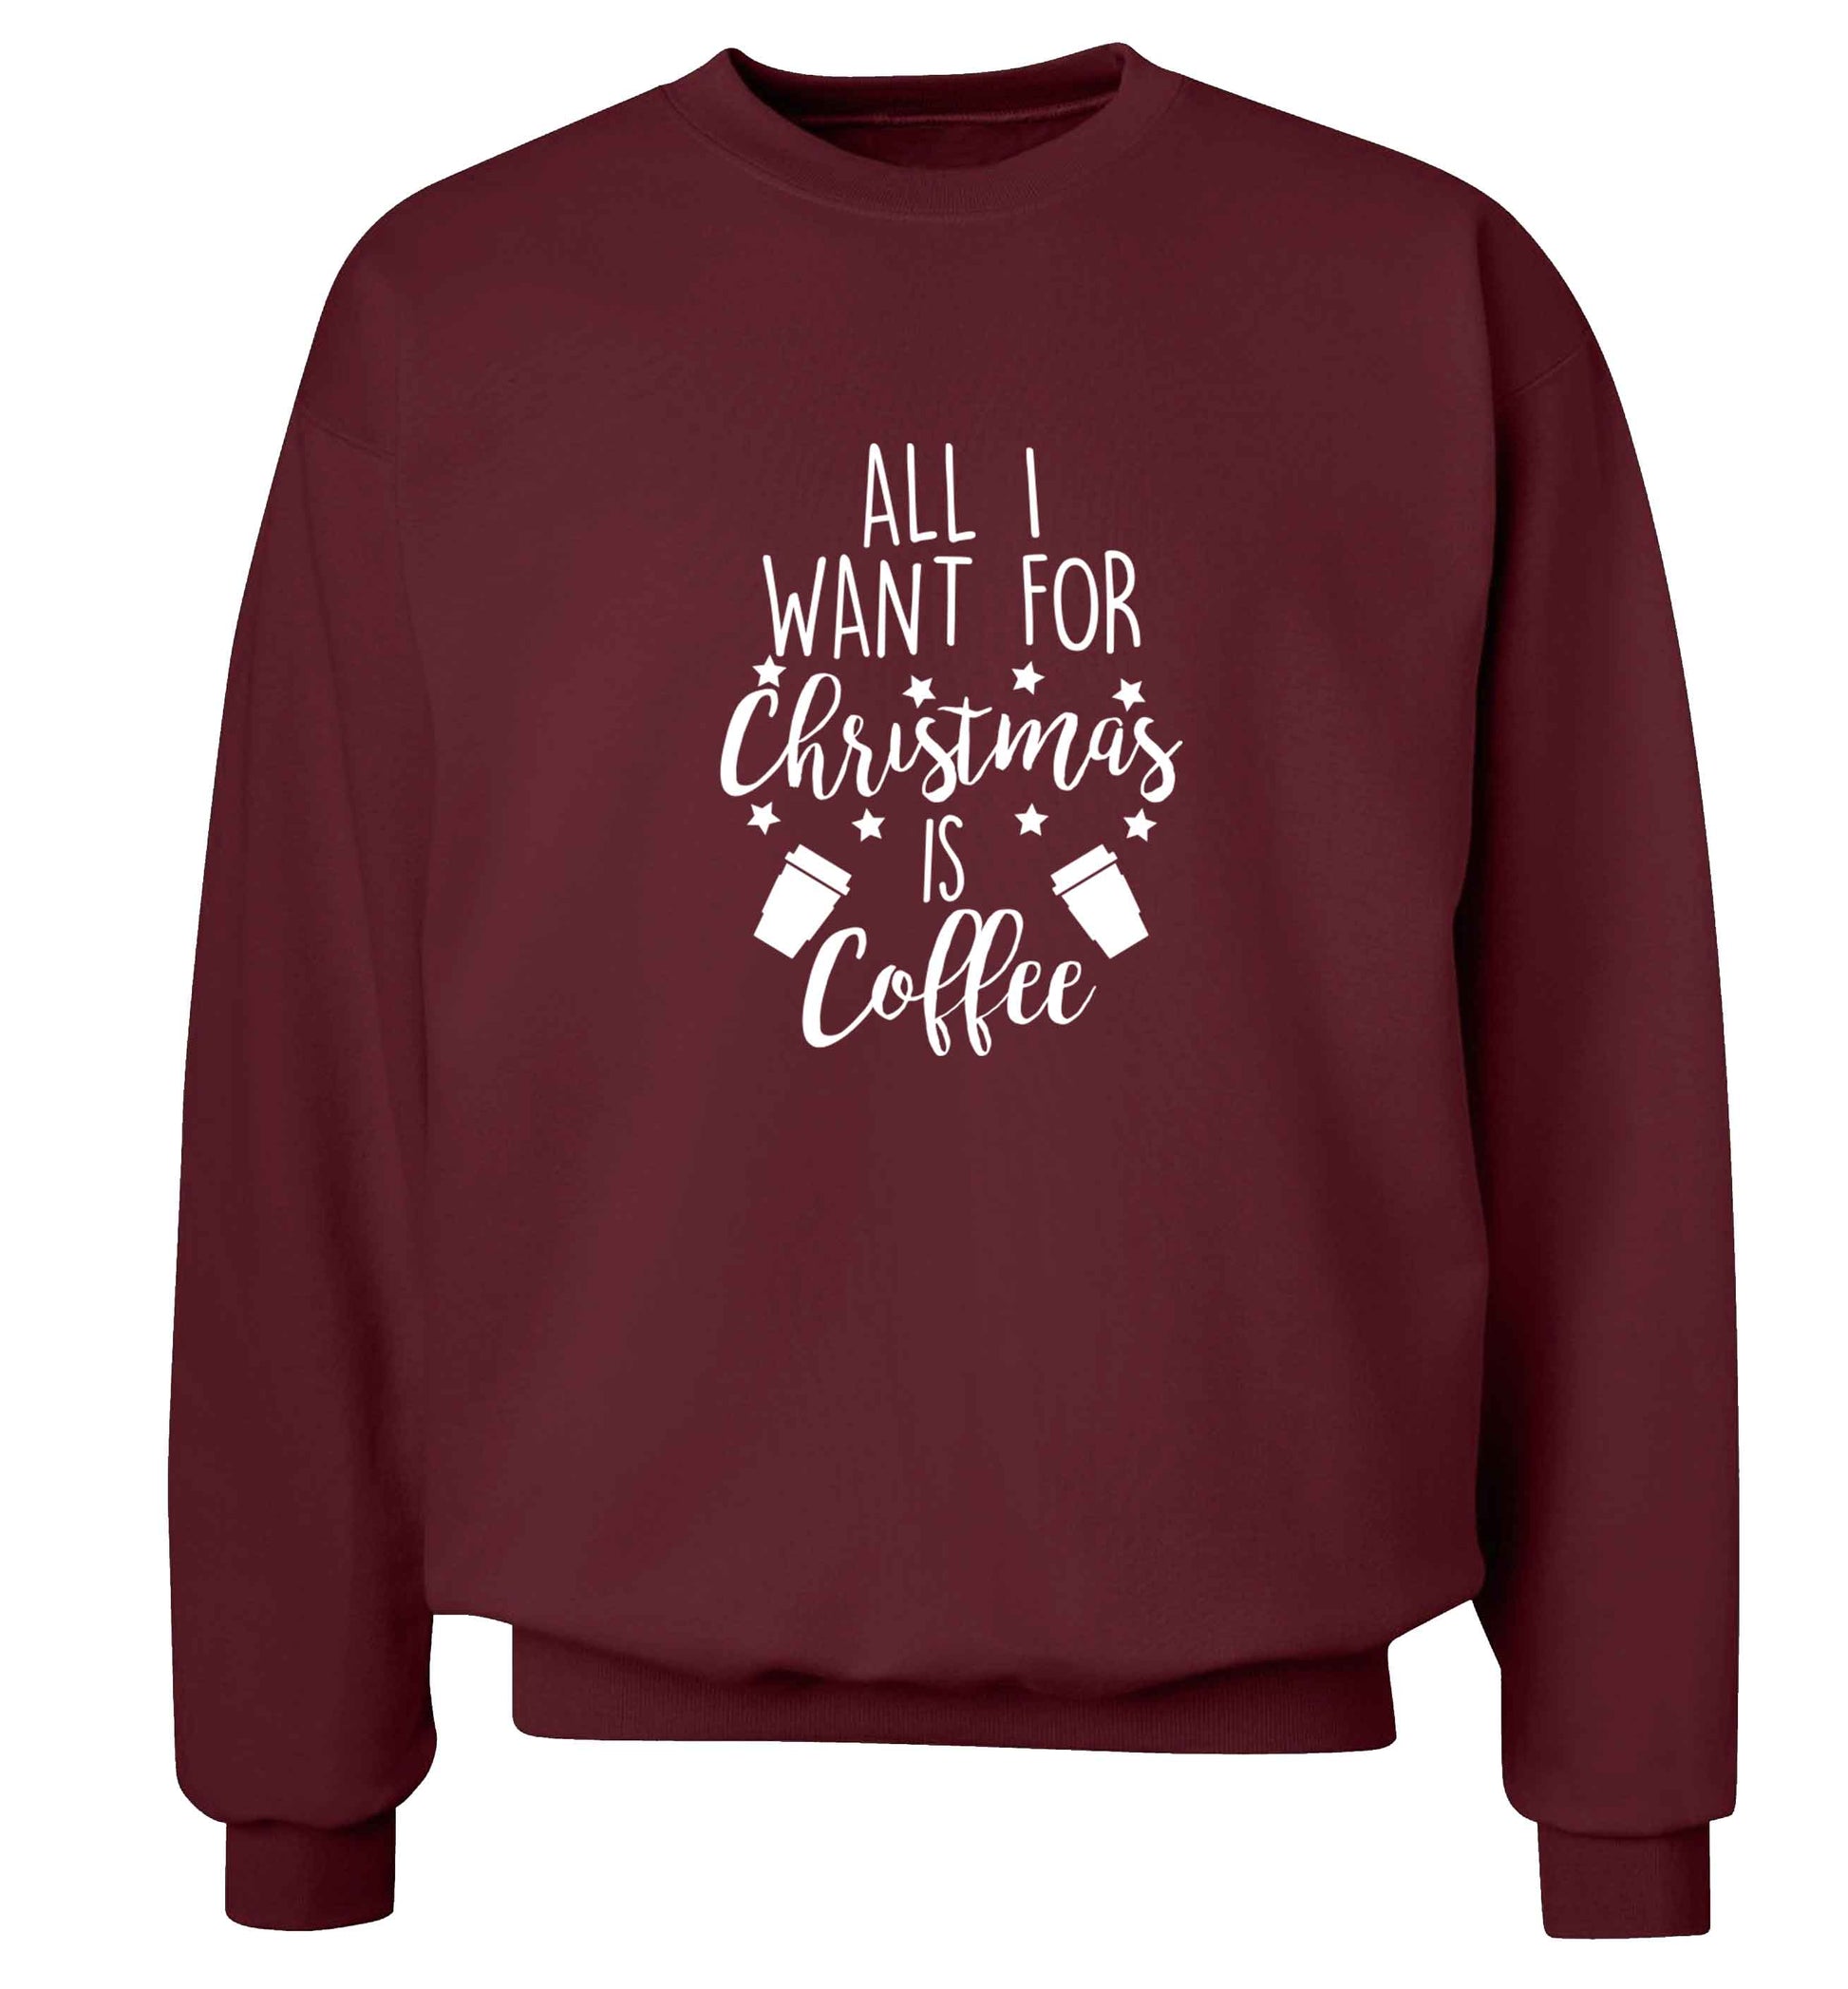 All I want for Christmas is coffee Adult's unisex maroon Sweater 2XL